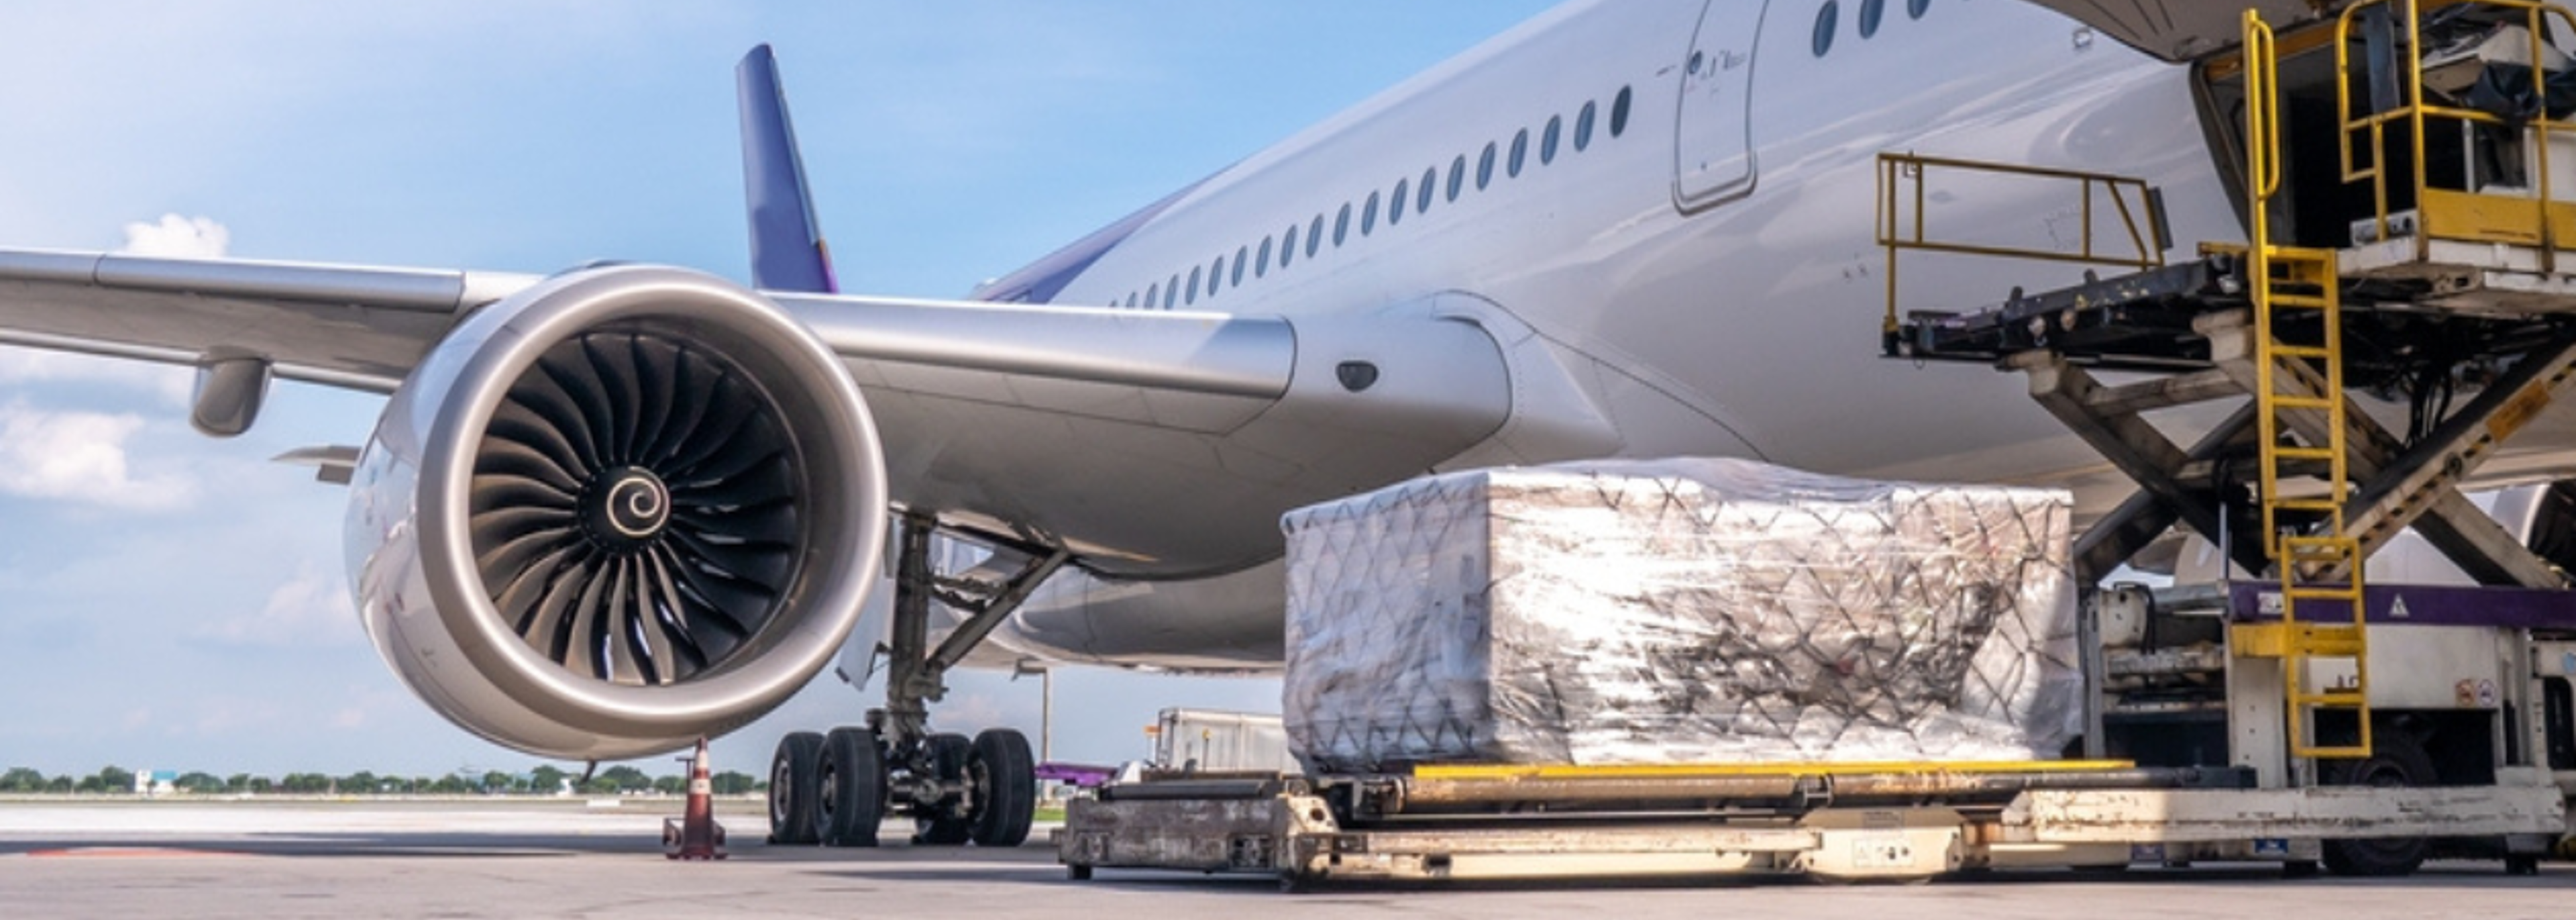 Air freight fuels surge in greenhouse gas emissions